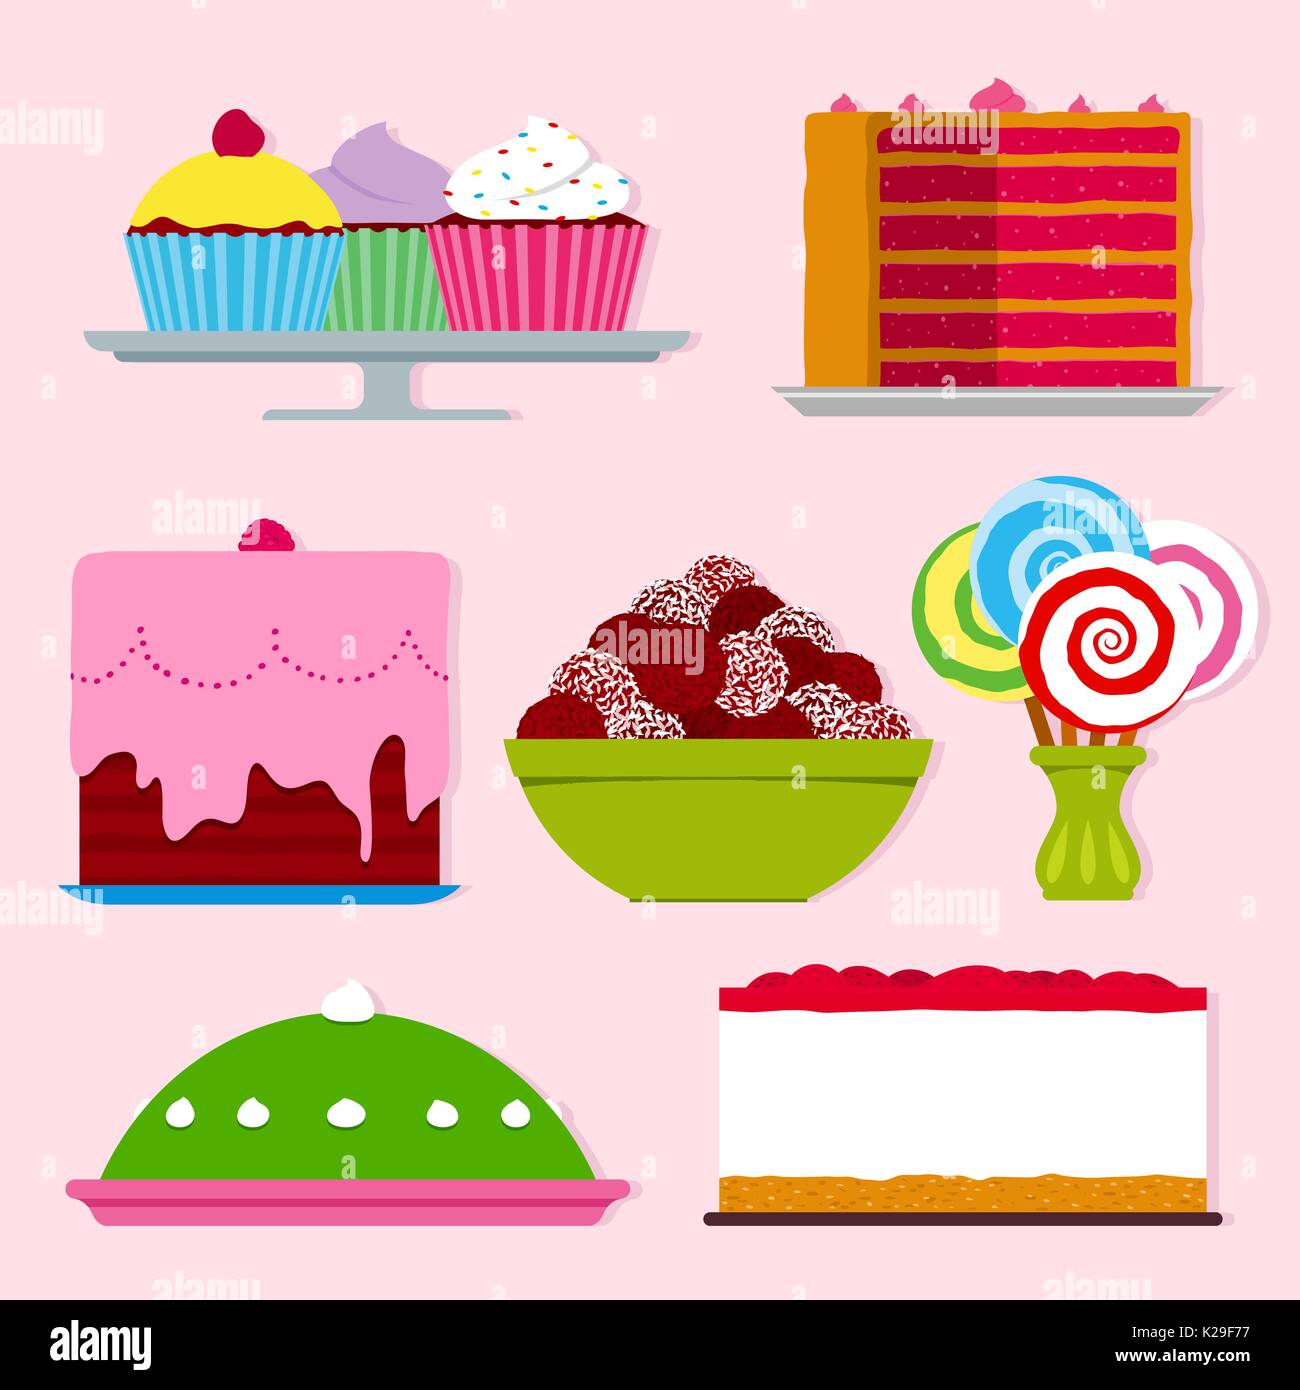 Sweet Land with Birthday Cake and Candies in the Sky Stock Illustration -  Illustration of birthday, candy: 201139785